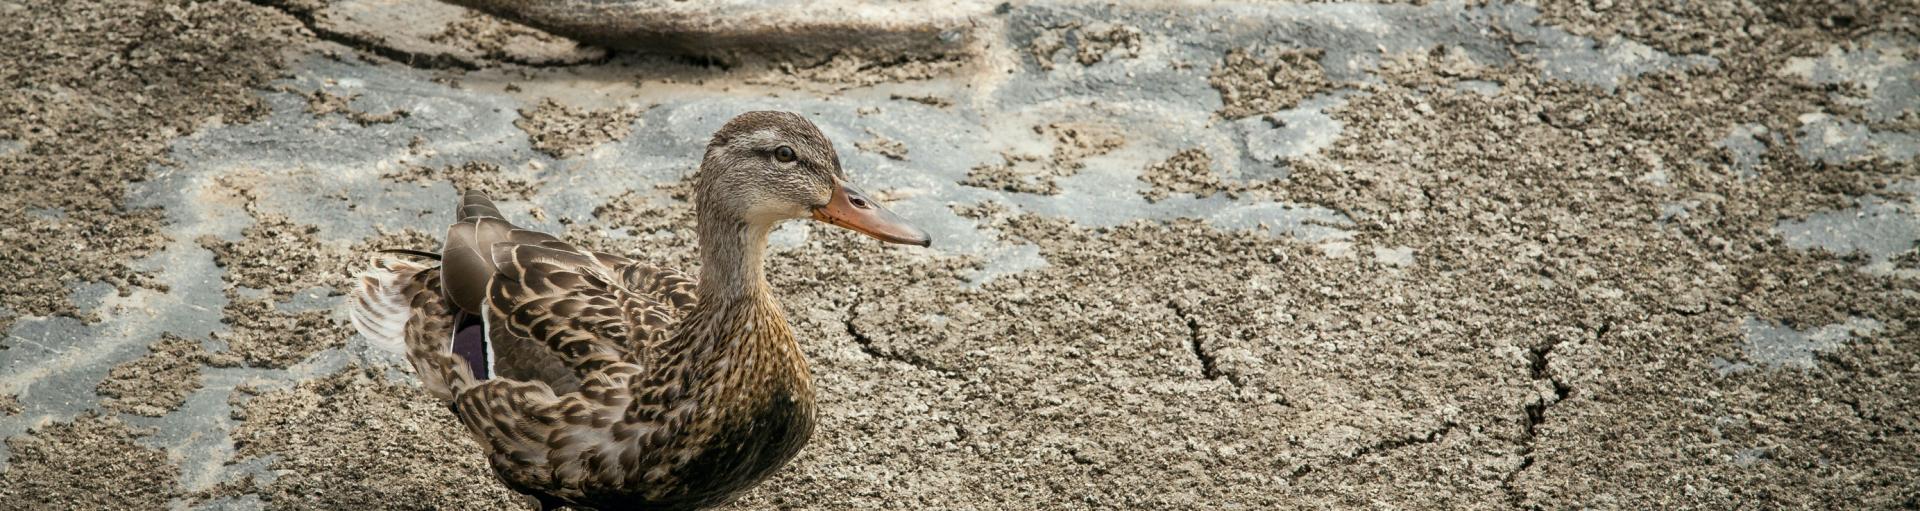 A duck stands in a dried out wetland area impacted by drought